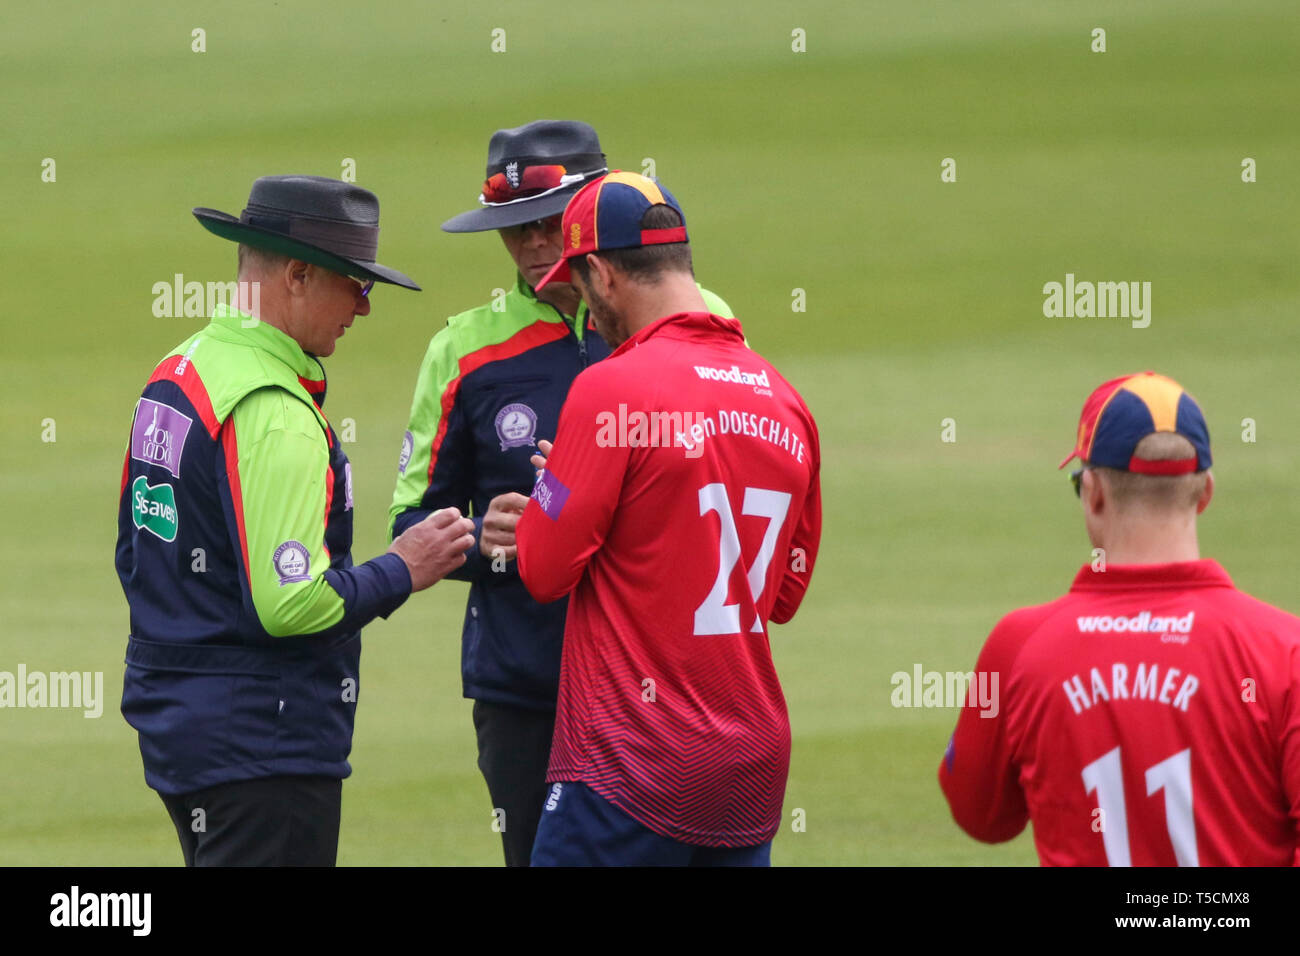 LONDON, UK. 23 April 2019: Umpires Ben Debenham and Mike Burns discuss the condition of the match ball wth captain Ryan ten Doeschate of Essex during the Surrey v Essex, Royal London One Day Cup match at The Kia Oval. Credit: Mitchell Gunn/ESPA-Images Stock Photo